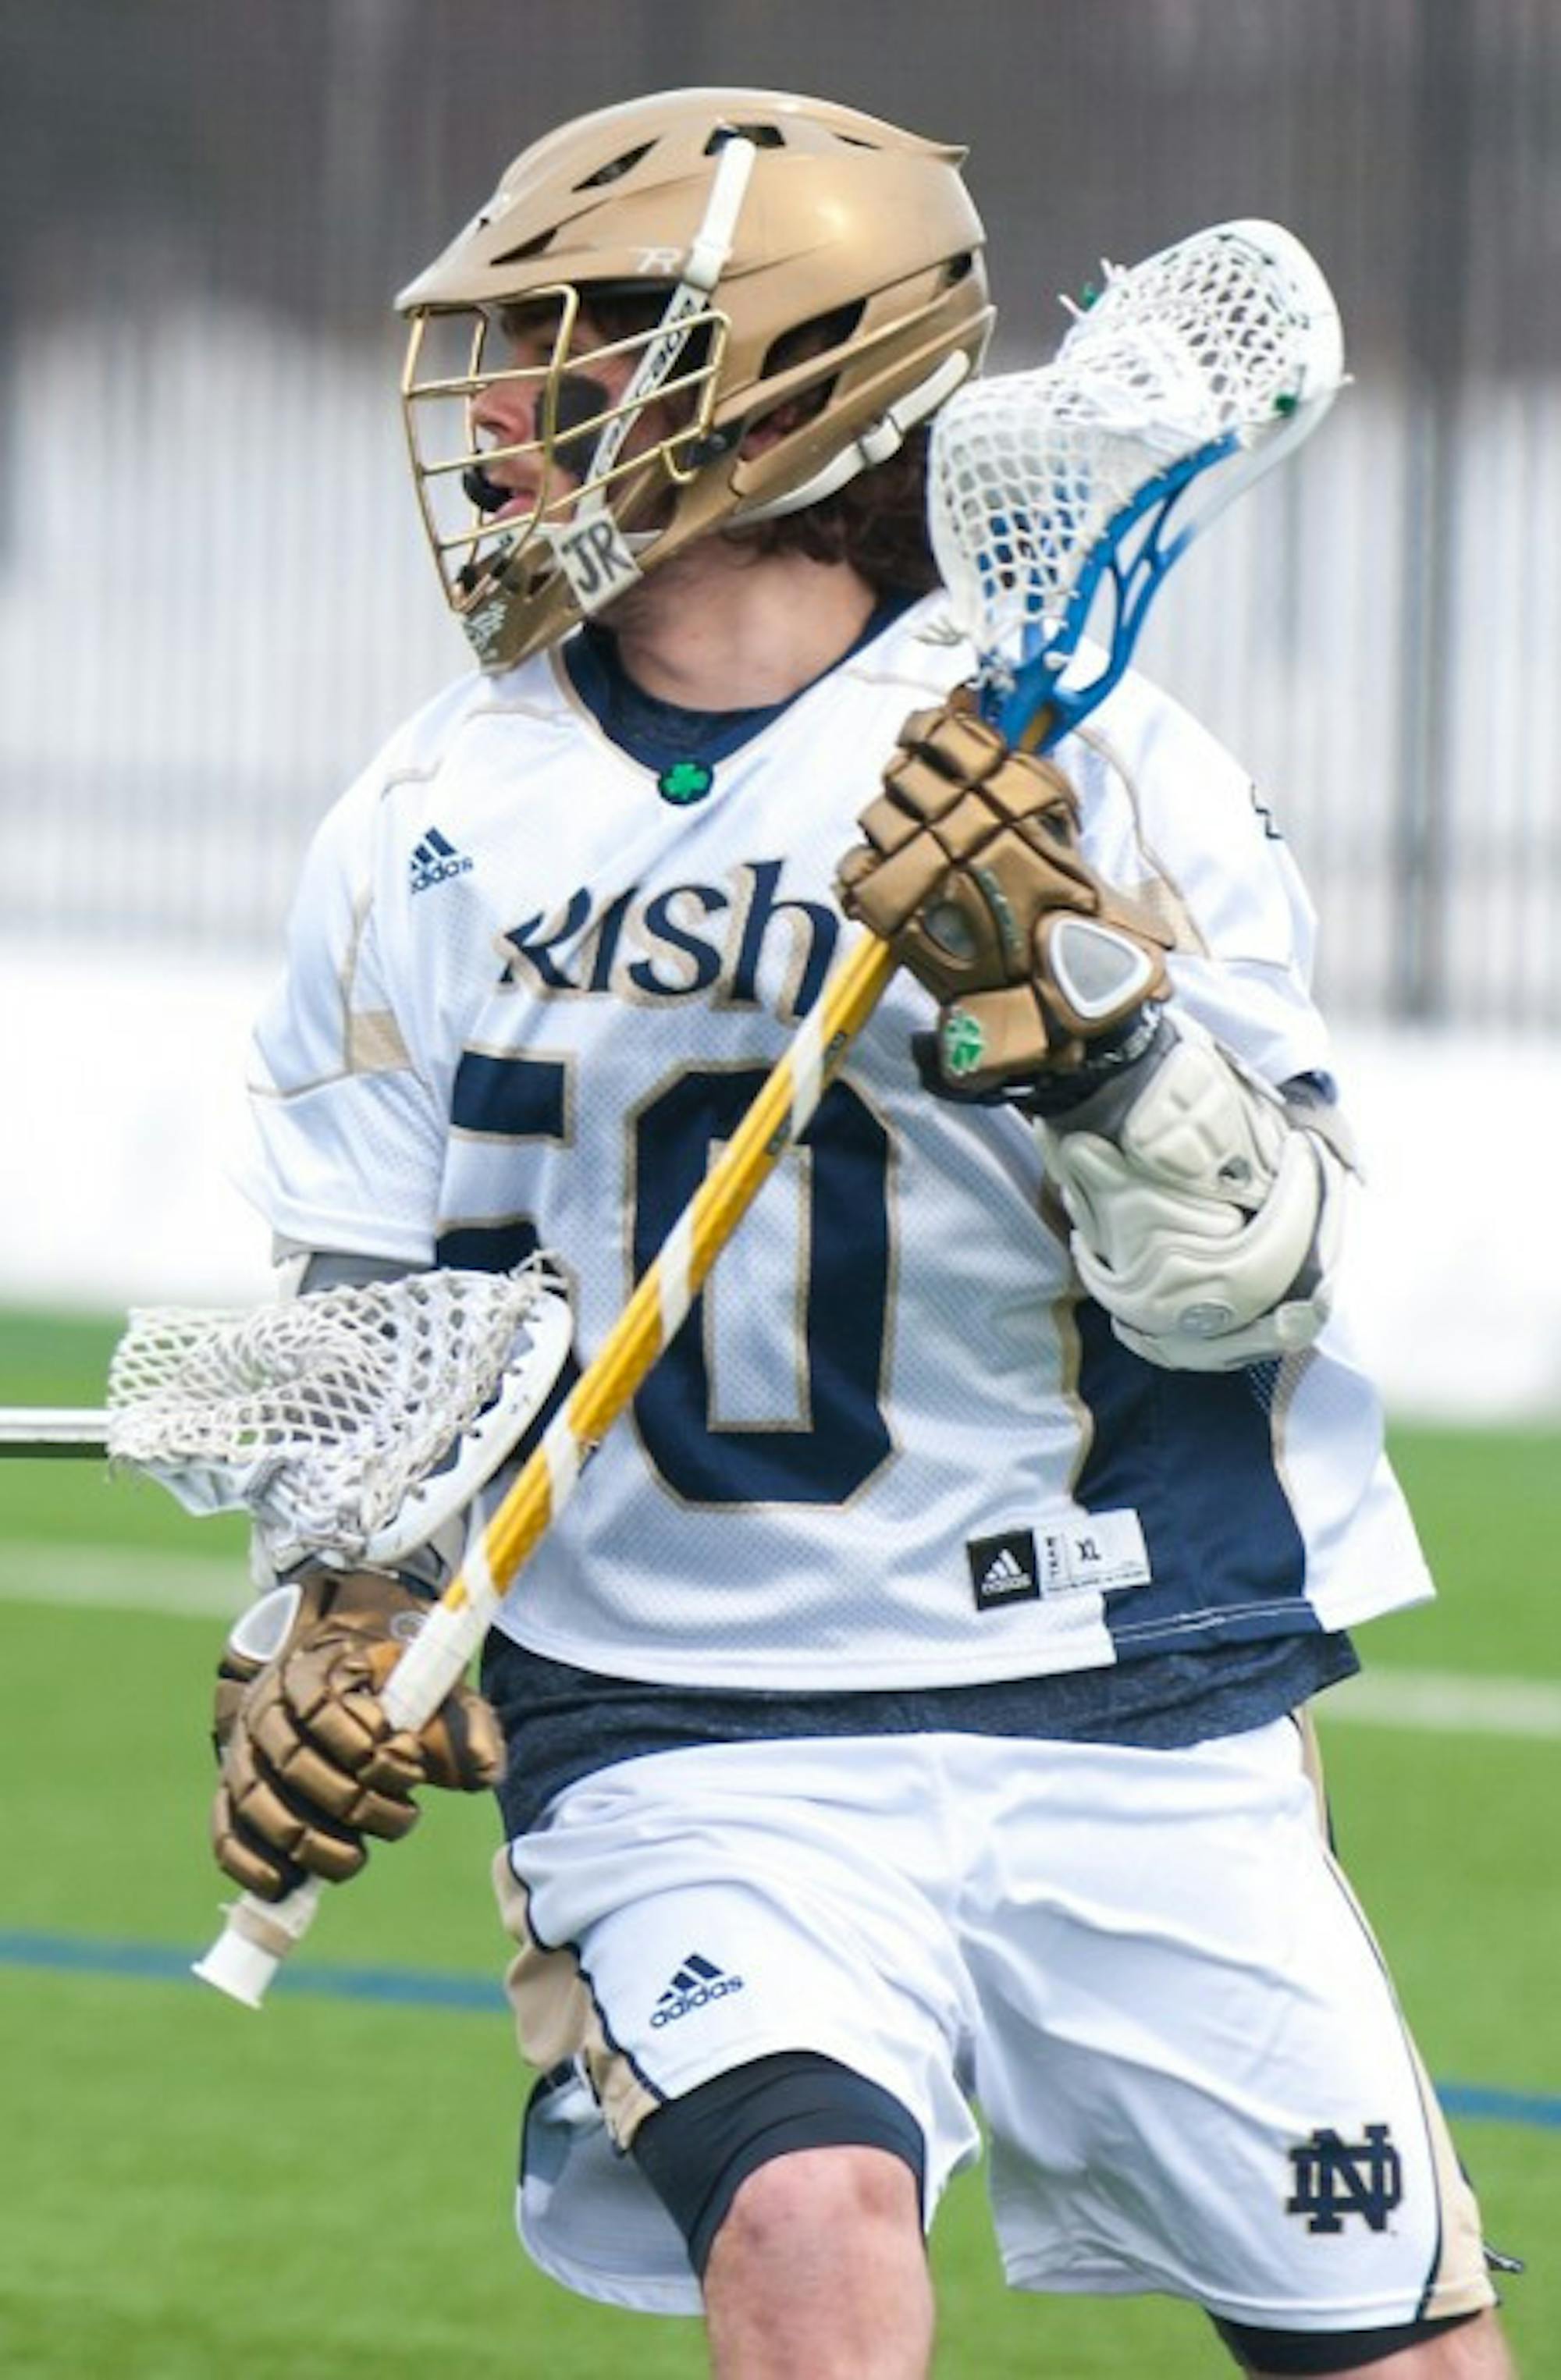 Irish sophomore attack Matt Kavanagh carries the ball during Notre Dame's 8-7 loss to Penn State at Arlotta Fields on Saturday. Kavanagh had three goals and two assists in the loss.